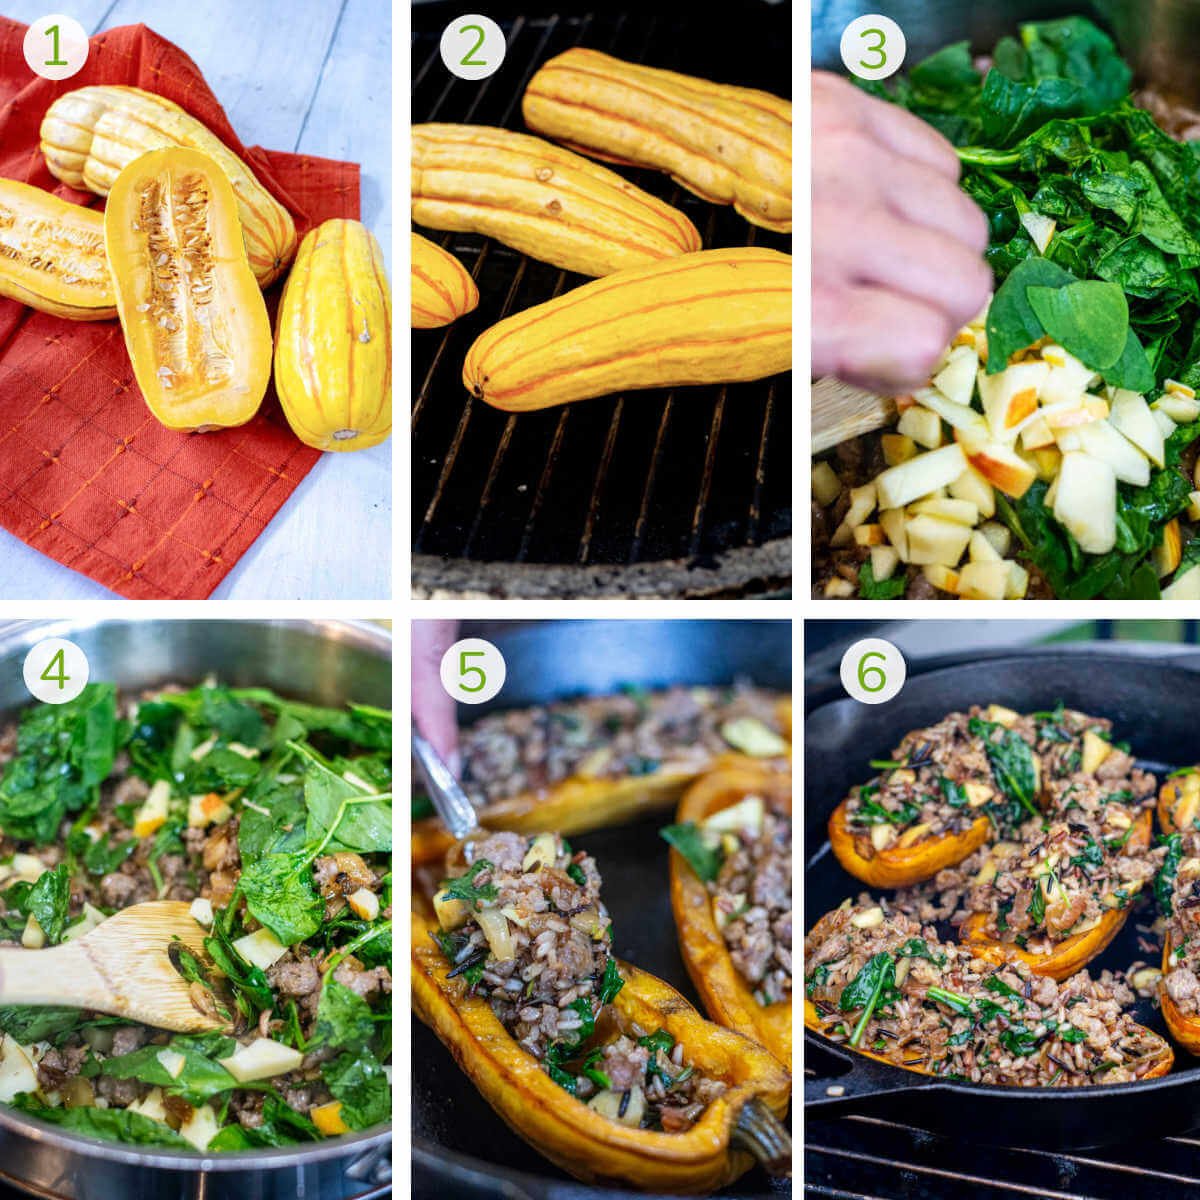 several process photos showing how to slice the squash in half, grill it, make the stuffing and finish it.